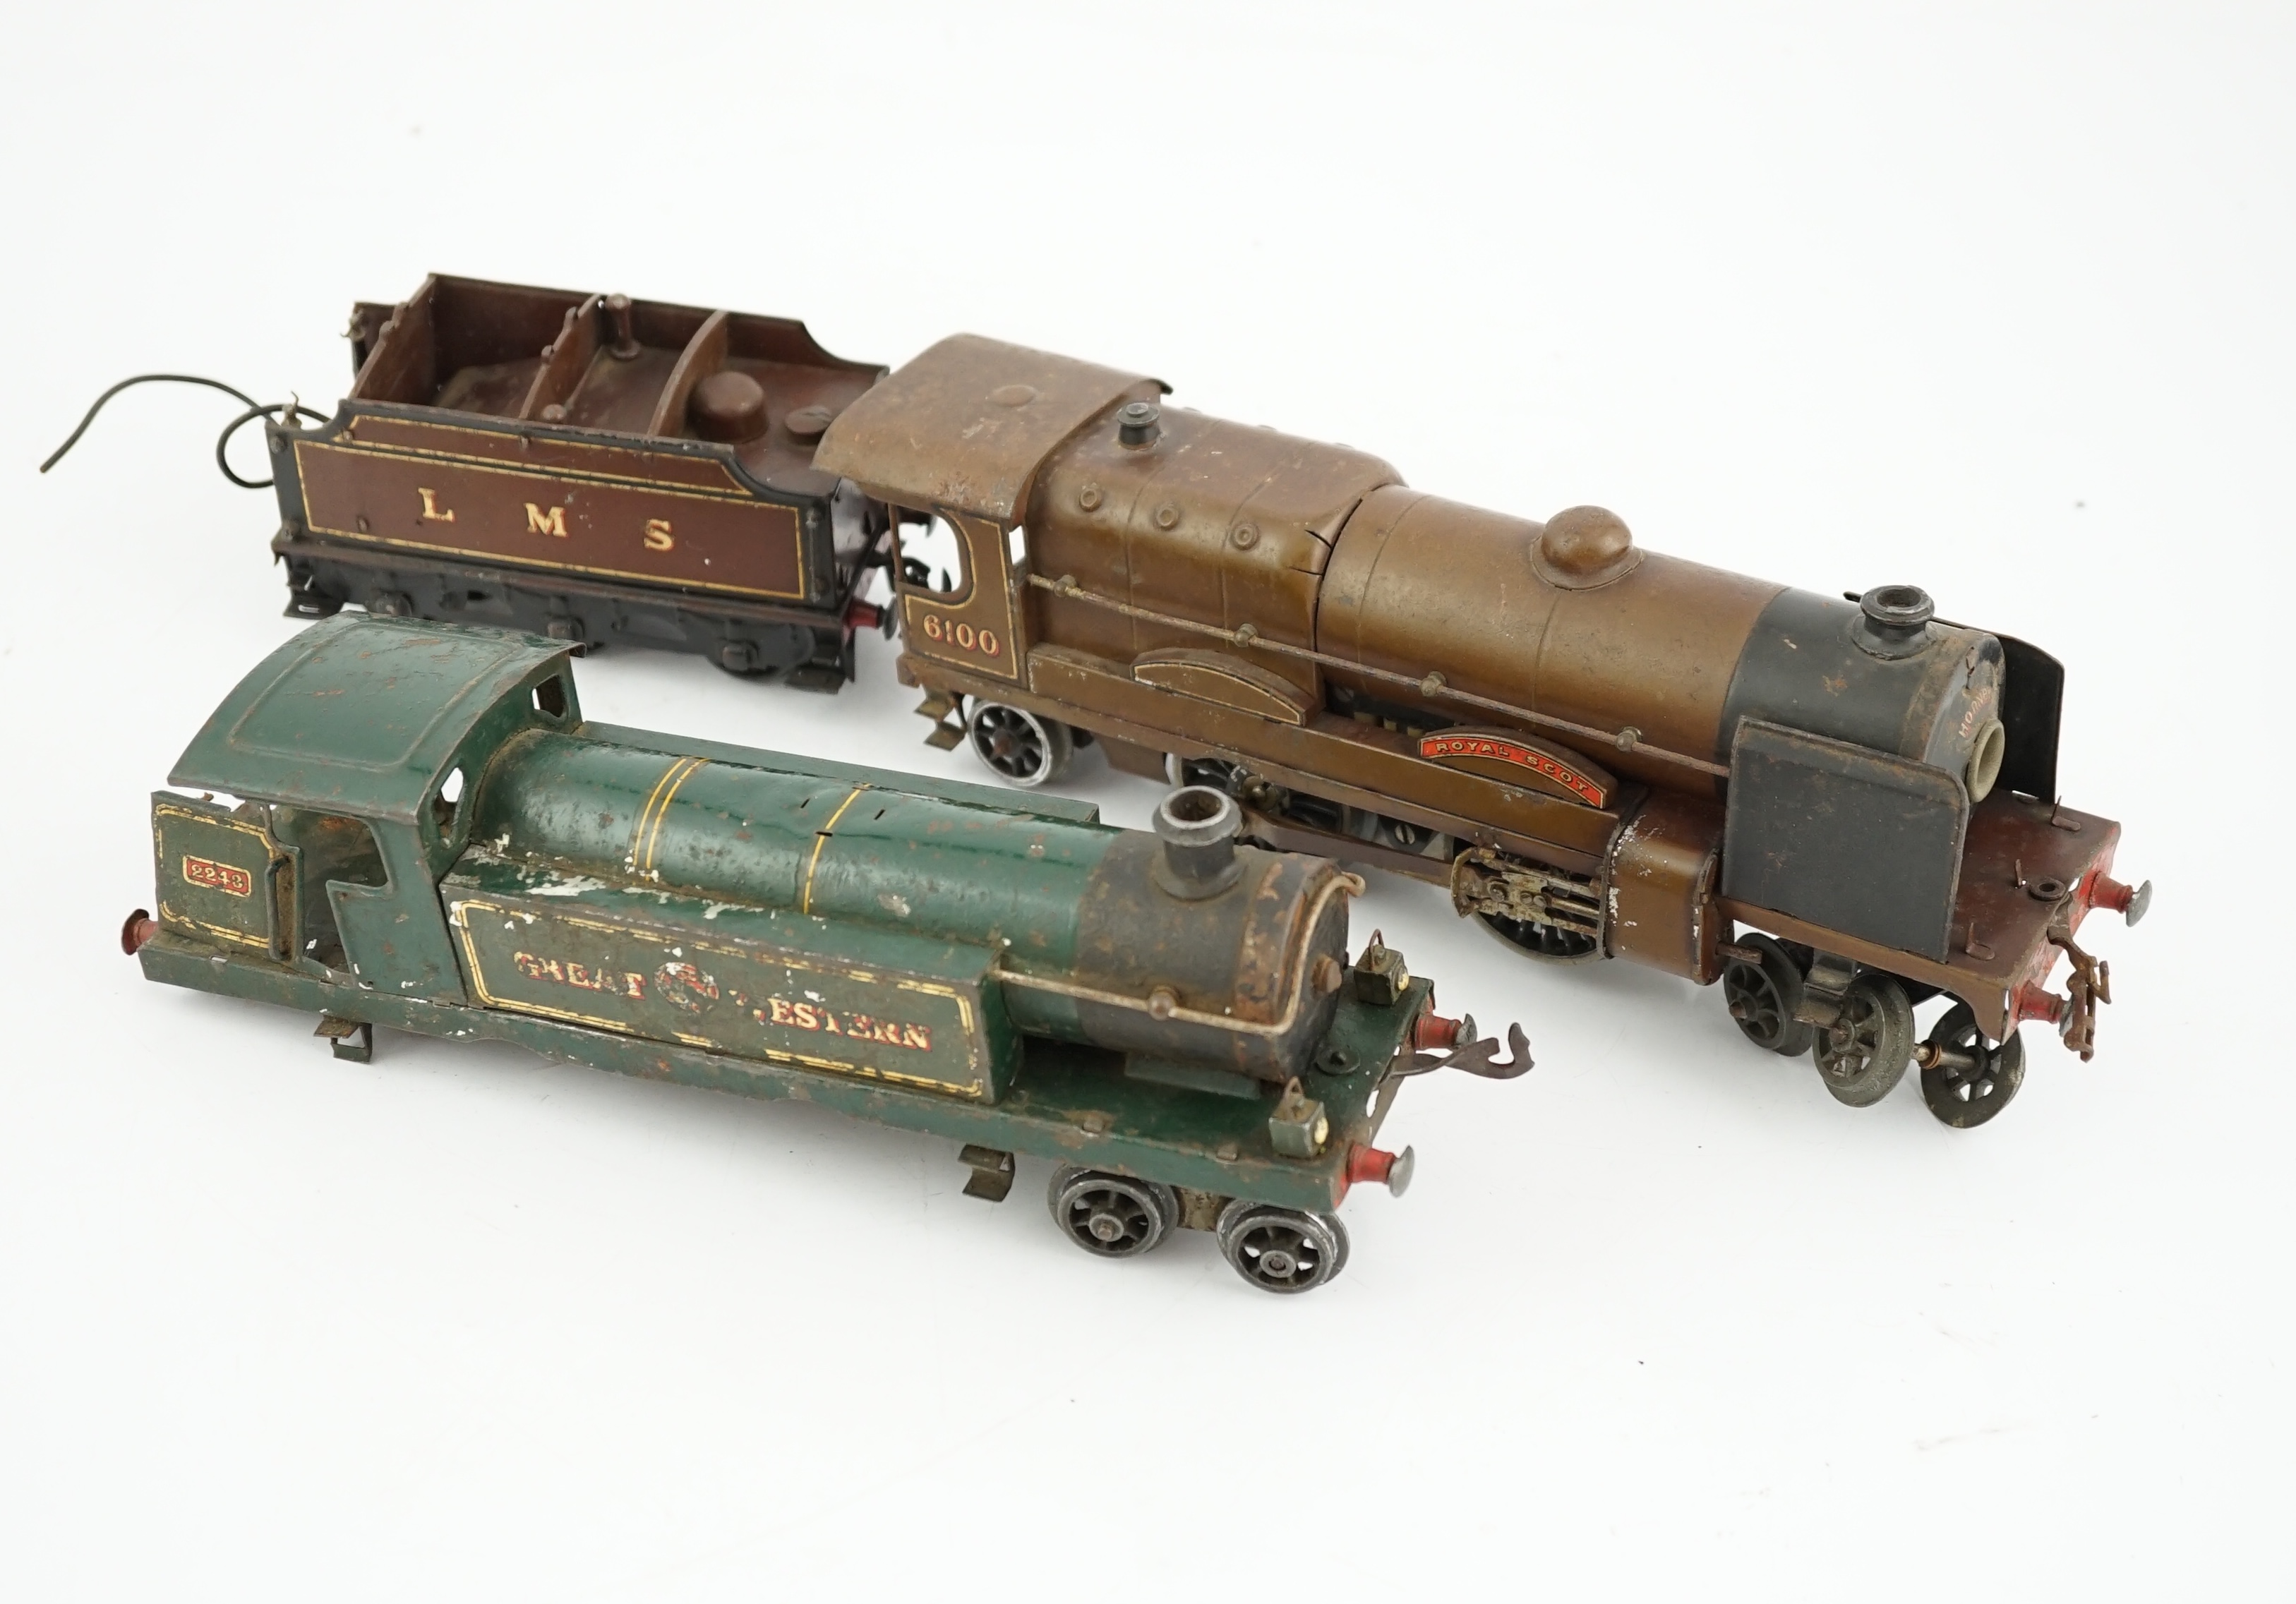 Two Hornby Series 0 gauge tinplate locomotives for 3-rail running; an LMS 4-4-2, Royal Scot 6100, - Image 5 of 9